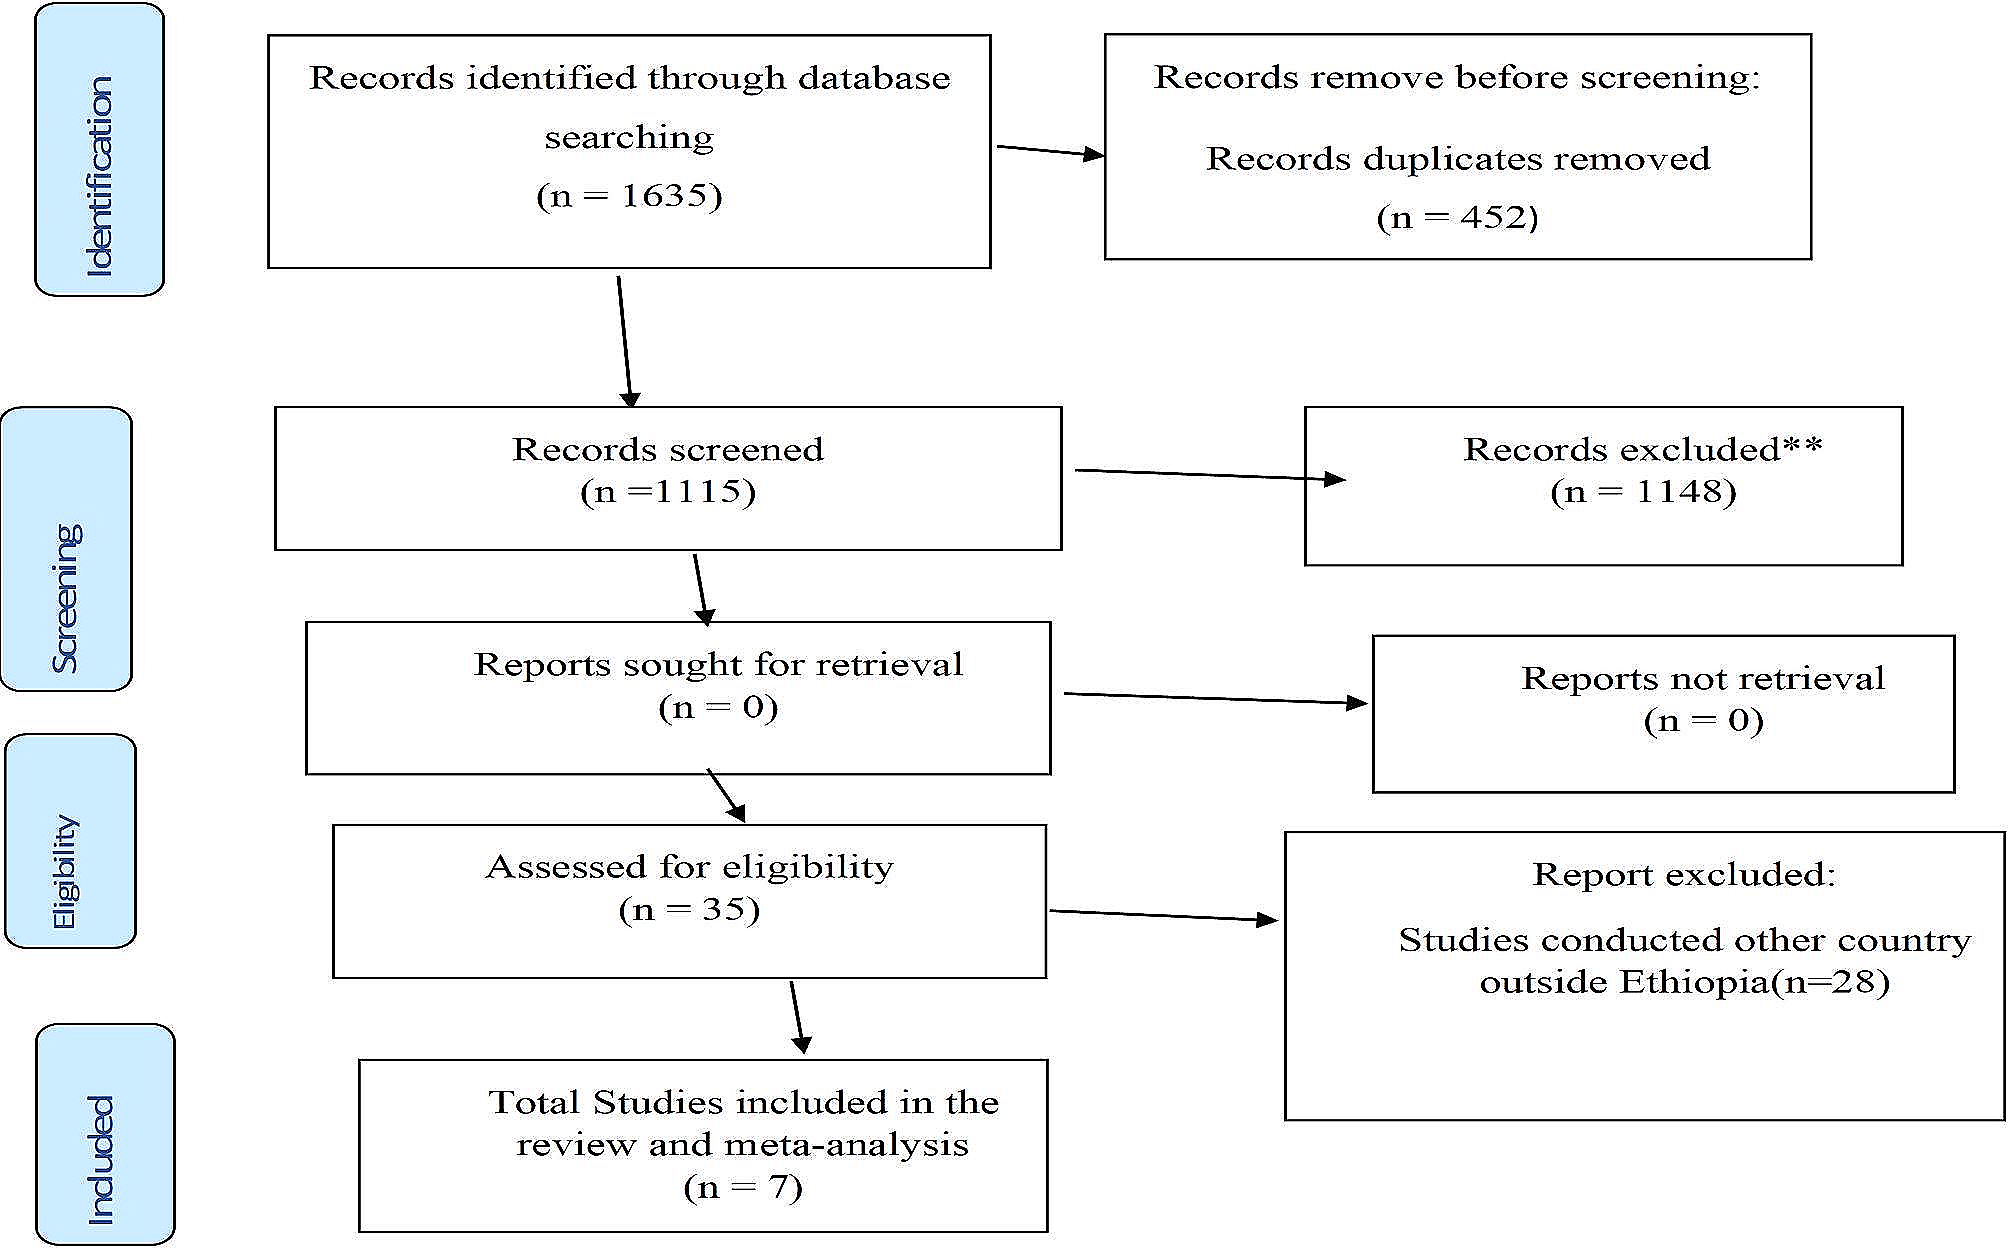 Patient knowledge of surgical informed consent and shared decision-making process among surgical patients in Ethiopia: a systematic review and meta-analysis